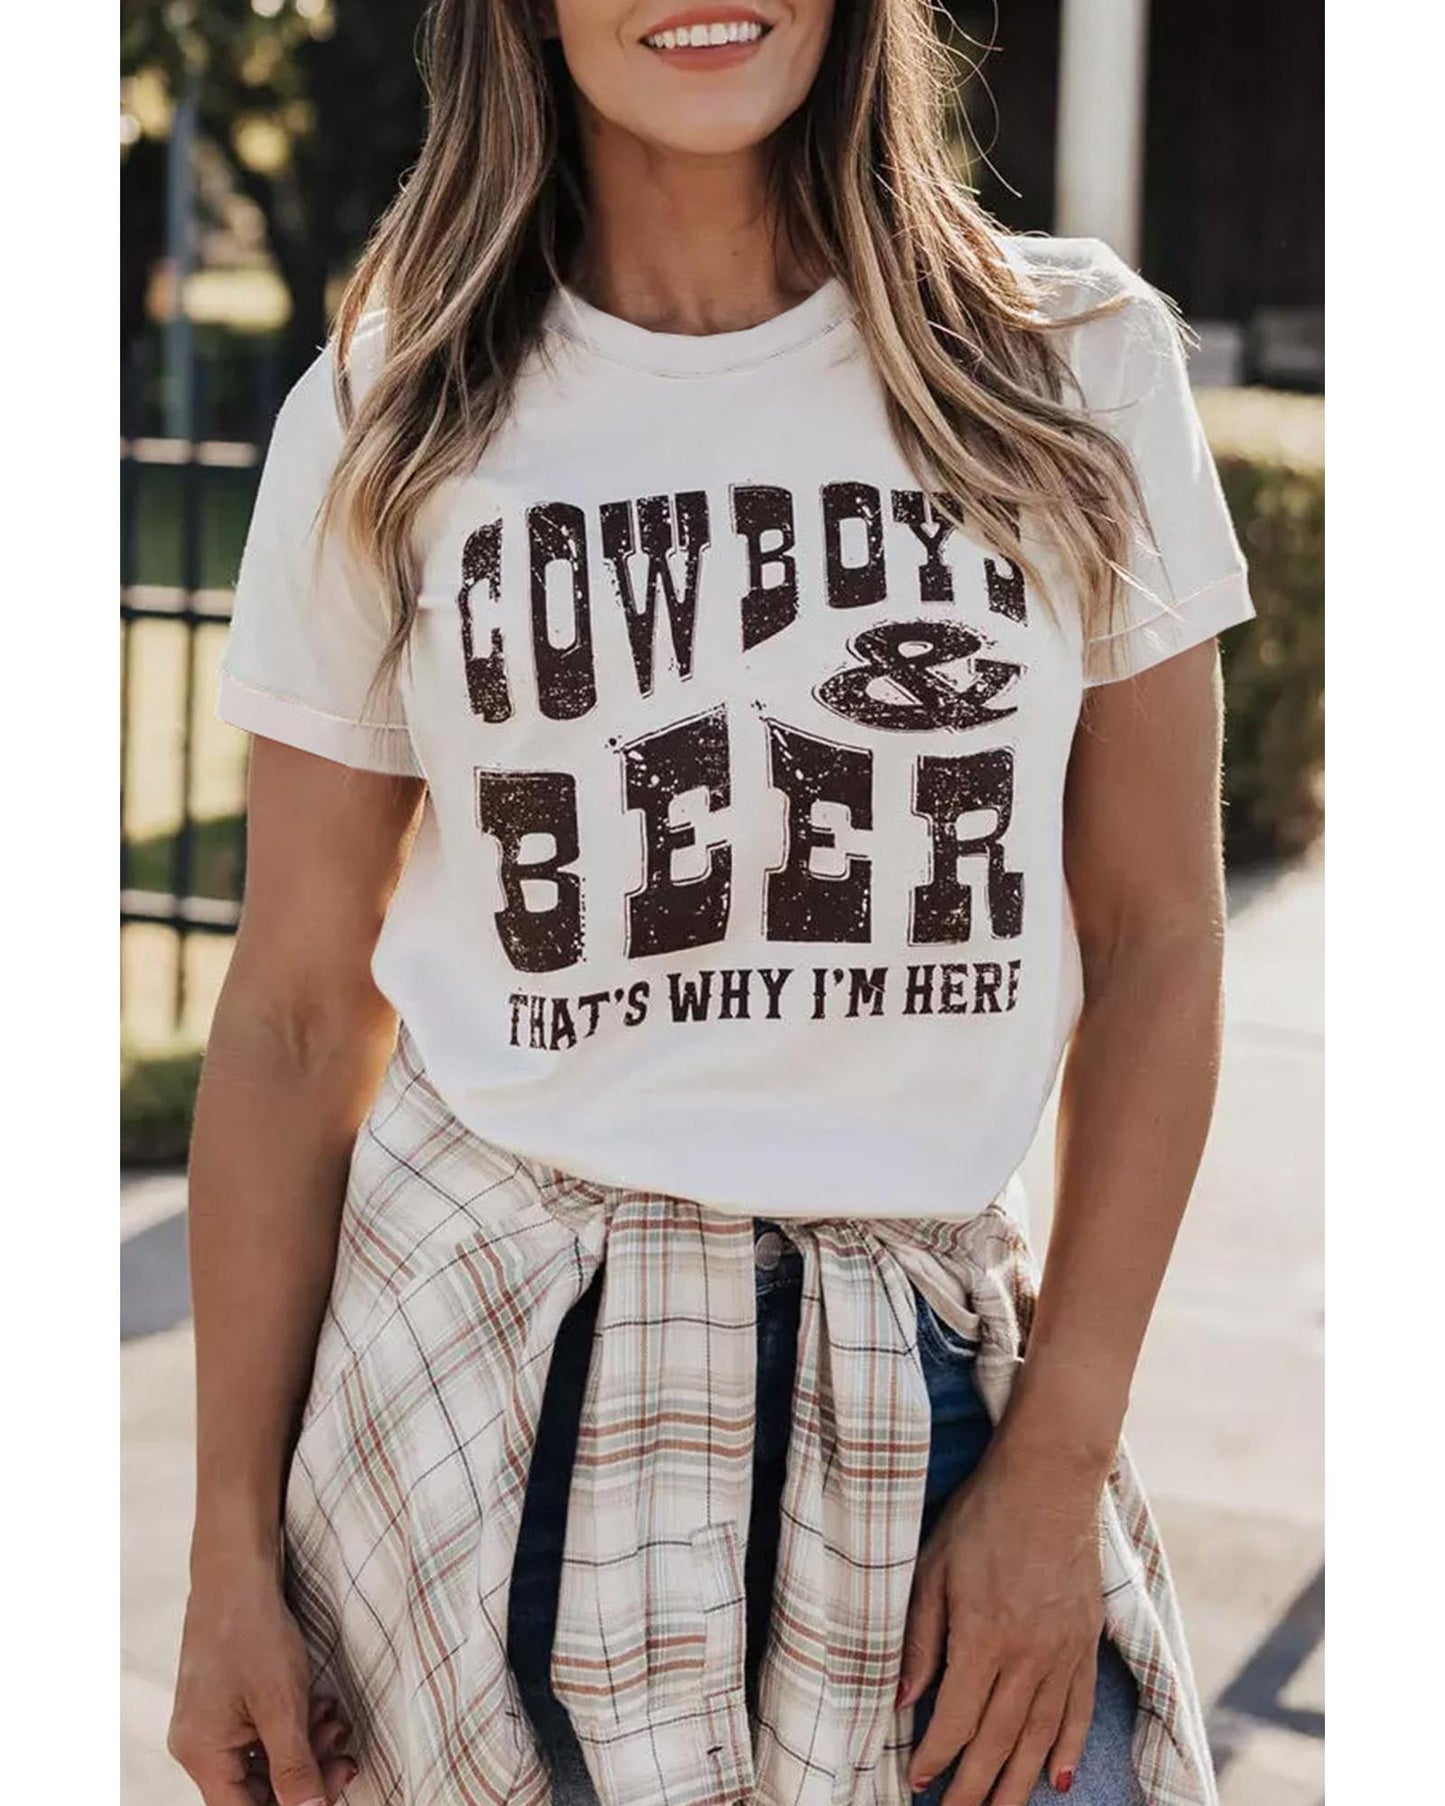 Azura Exchange COW BOYS & BEERS Letters Graphic T-shirt - L